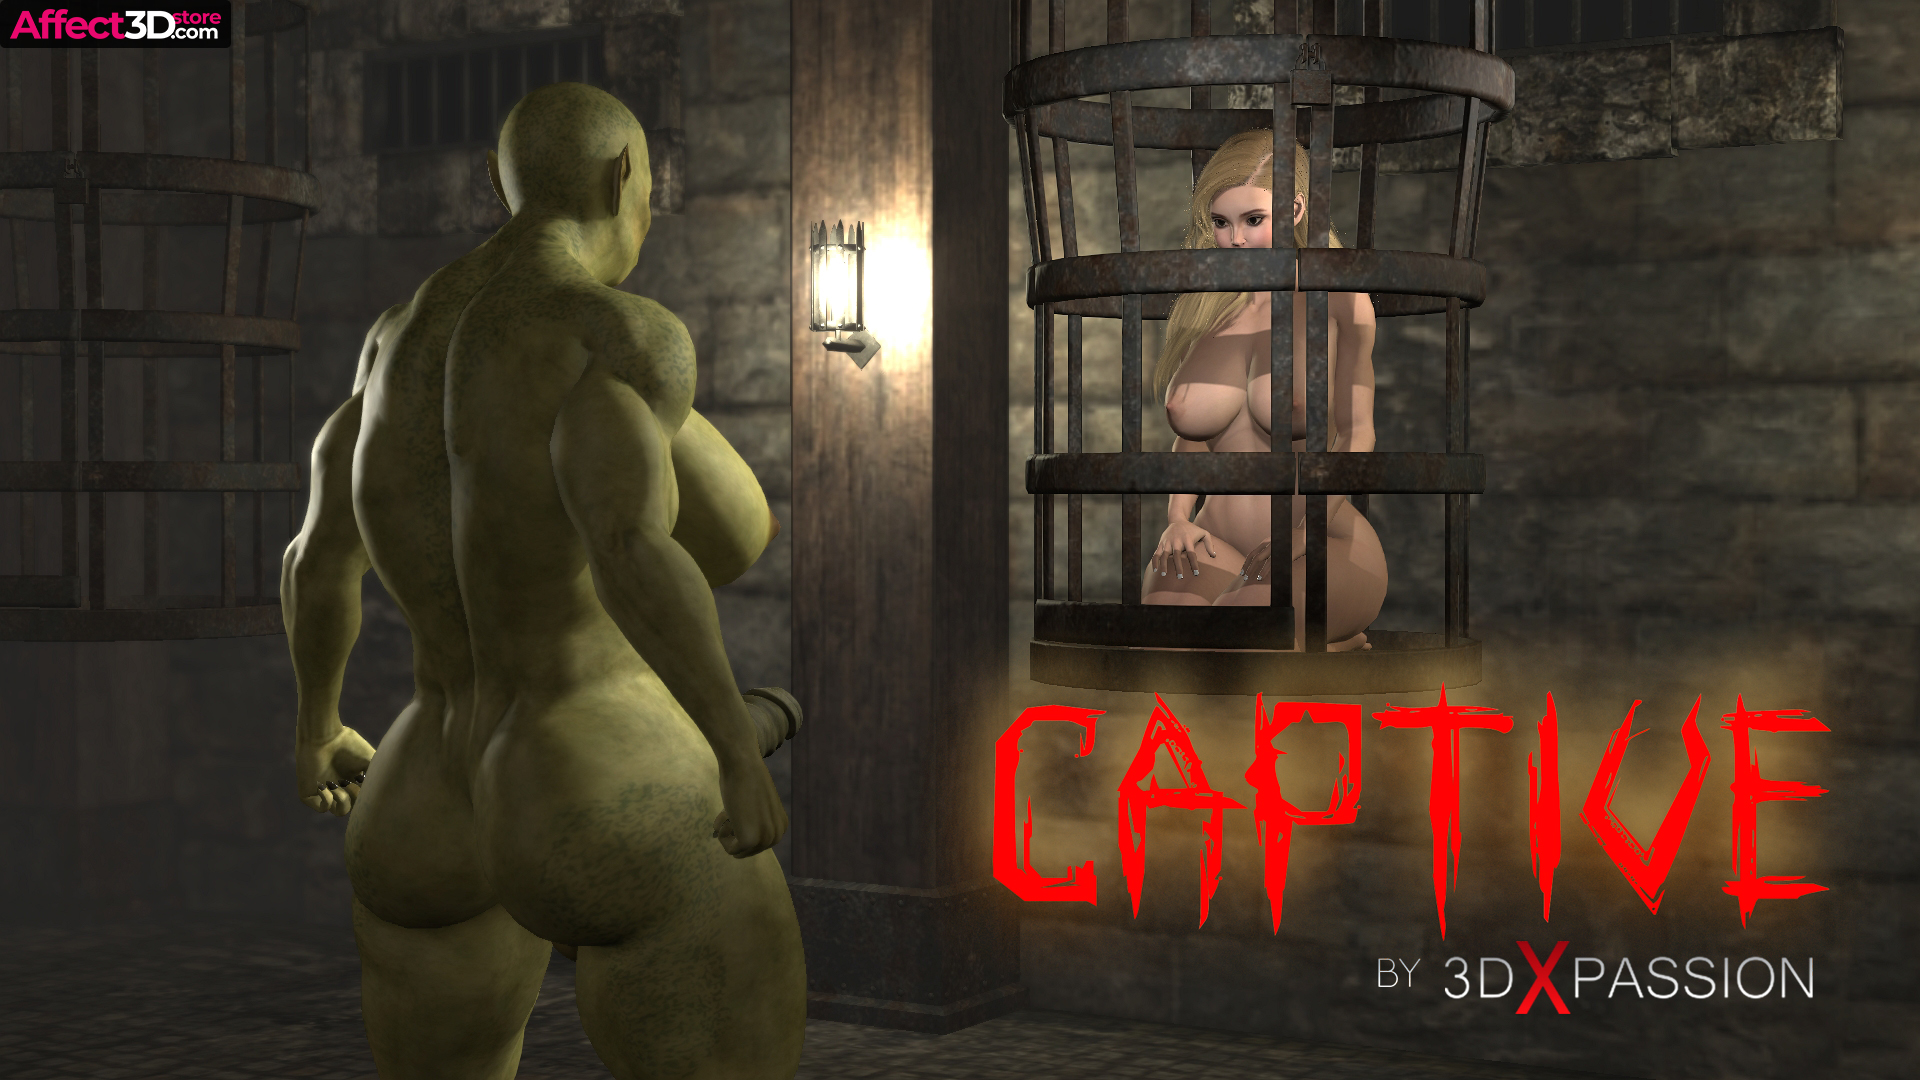 Captive - 3D futanari animation by 3DXPassion - busty blonde anticipating what the futa Orc wants to do to her